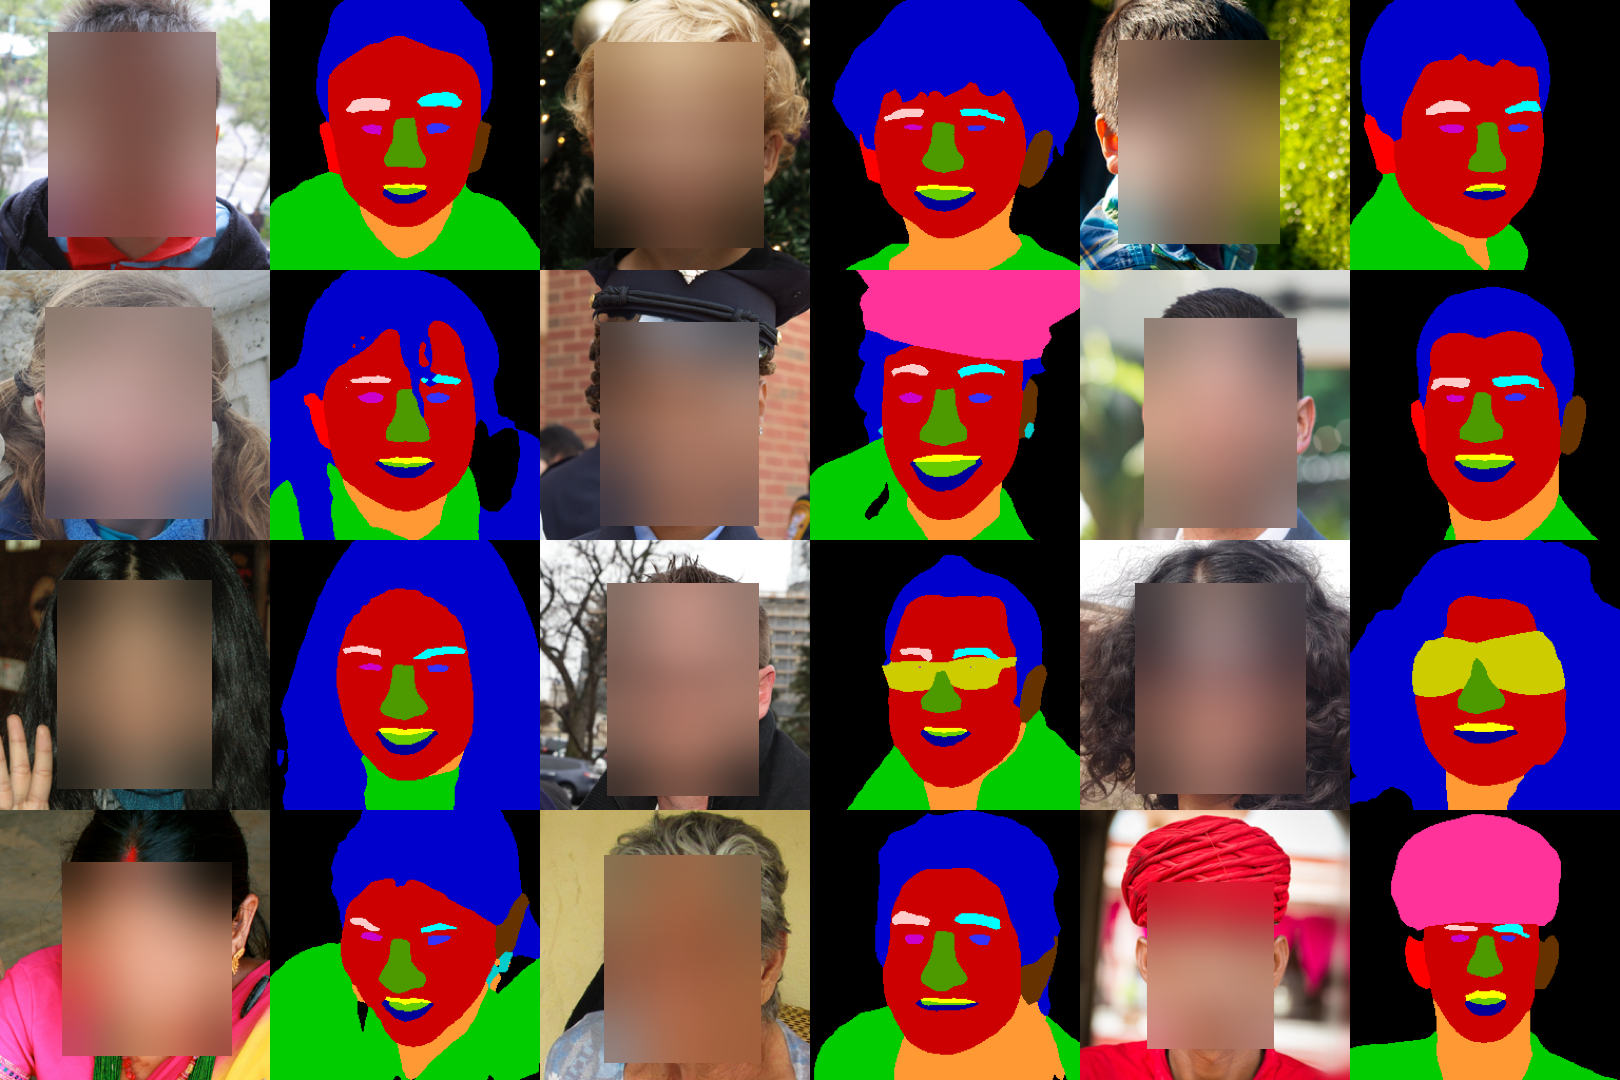  Example faces from the FFHQ aging dataset. Source: https://github.com/royorel/FFHQ-Aging-Dataset